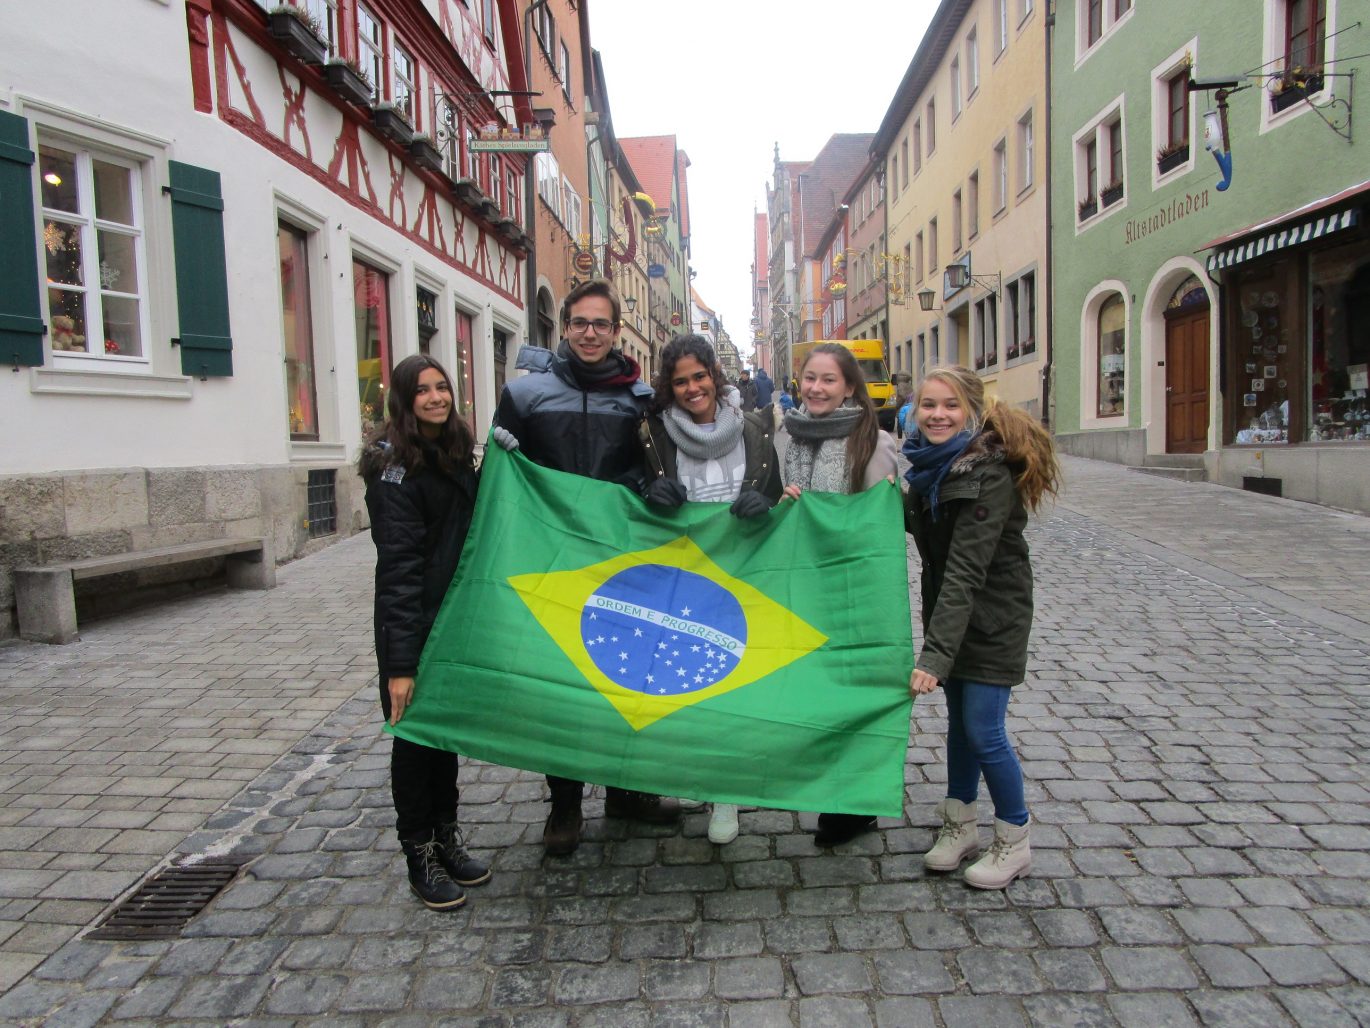 Students from Brazil as guests at Wilhelm-Löhe-Schule (Germany)